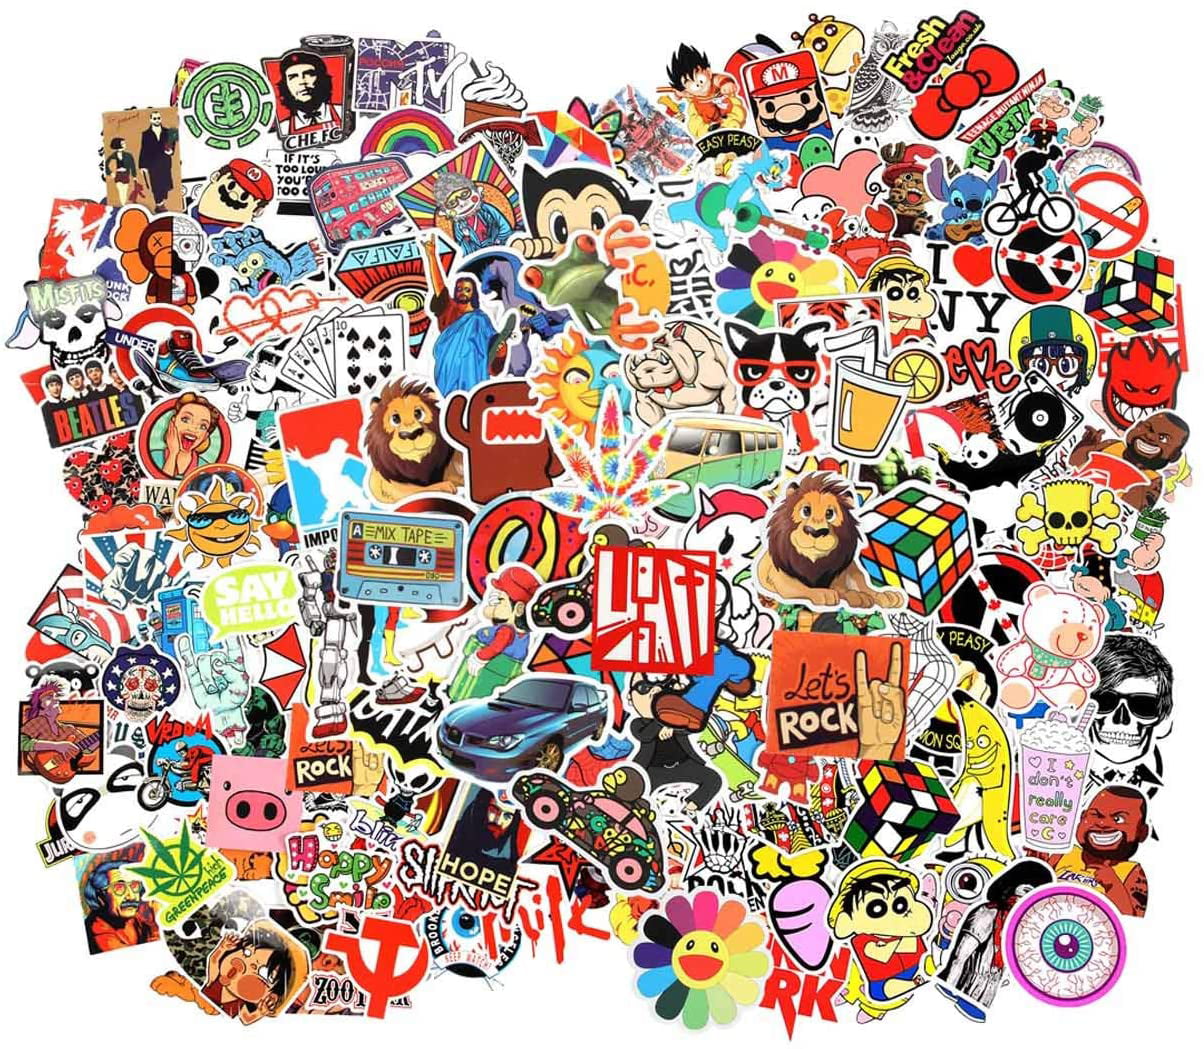 Waterproof Graffiti Stickers,Notebook Computer Decal Stickers,Luggage,Cars,Motorcycles,Bicycles Vinyl Stickers,Skateboard Stickers PVC Random 50 pcs 